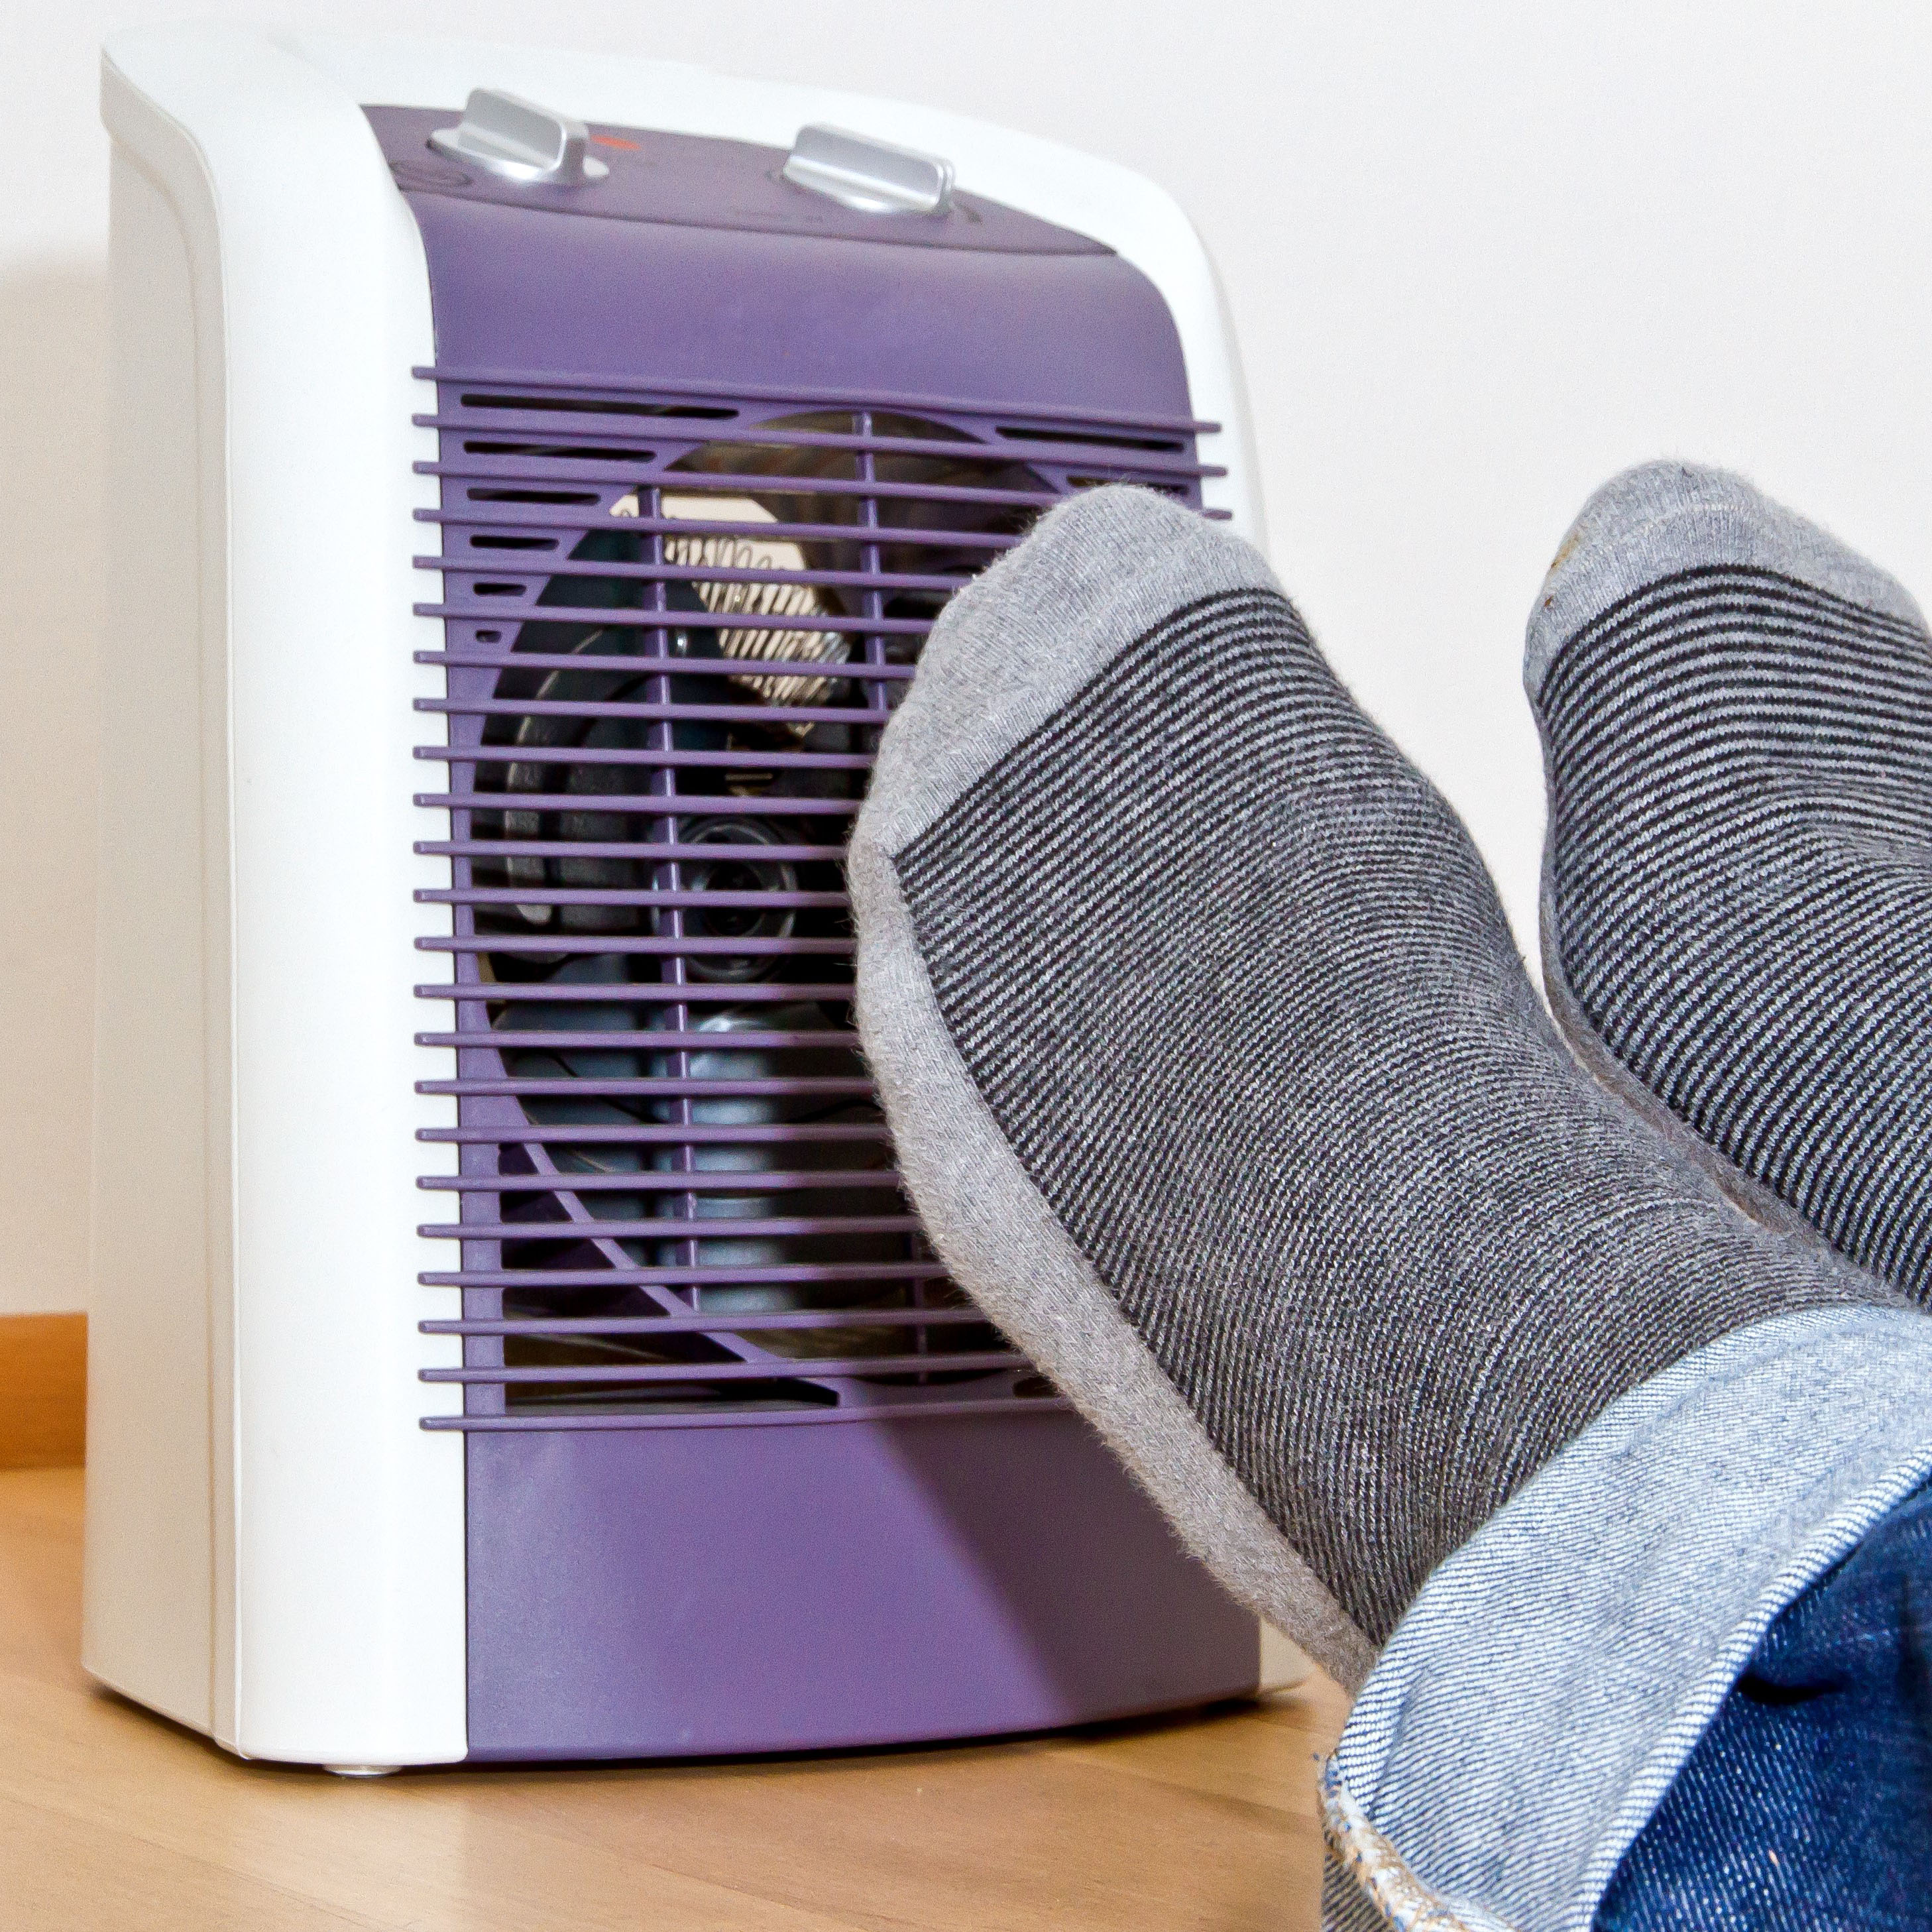 A seemingly cheap fan or bar heater may be costing you more than you think.